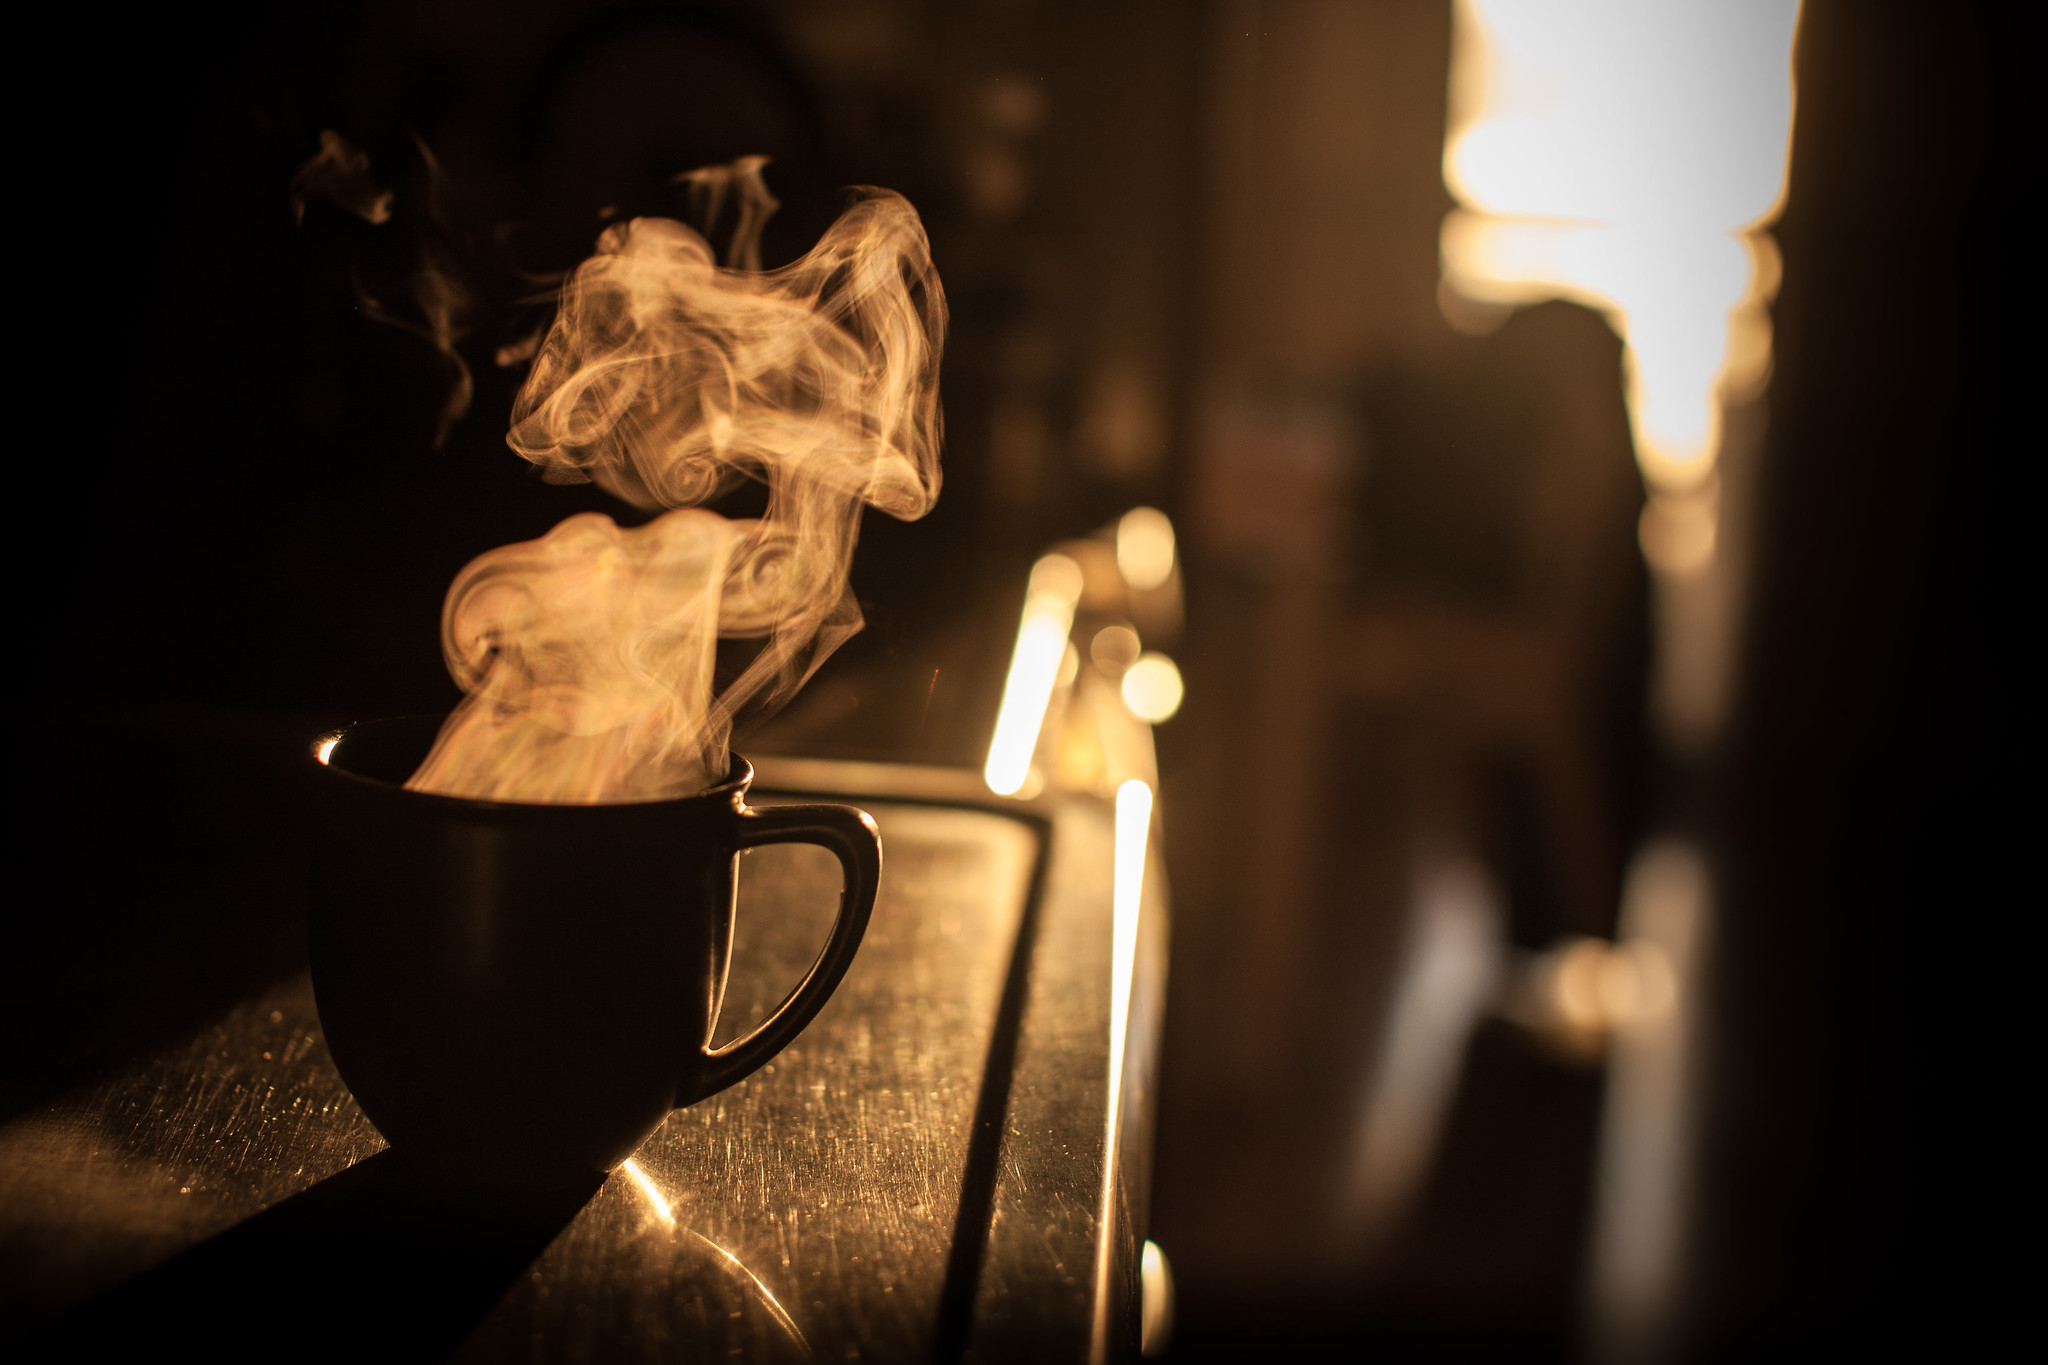 Coffee on a Winter&amp;#39;s morning | Flickr - Photo Sharing!